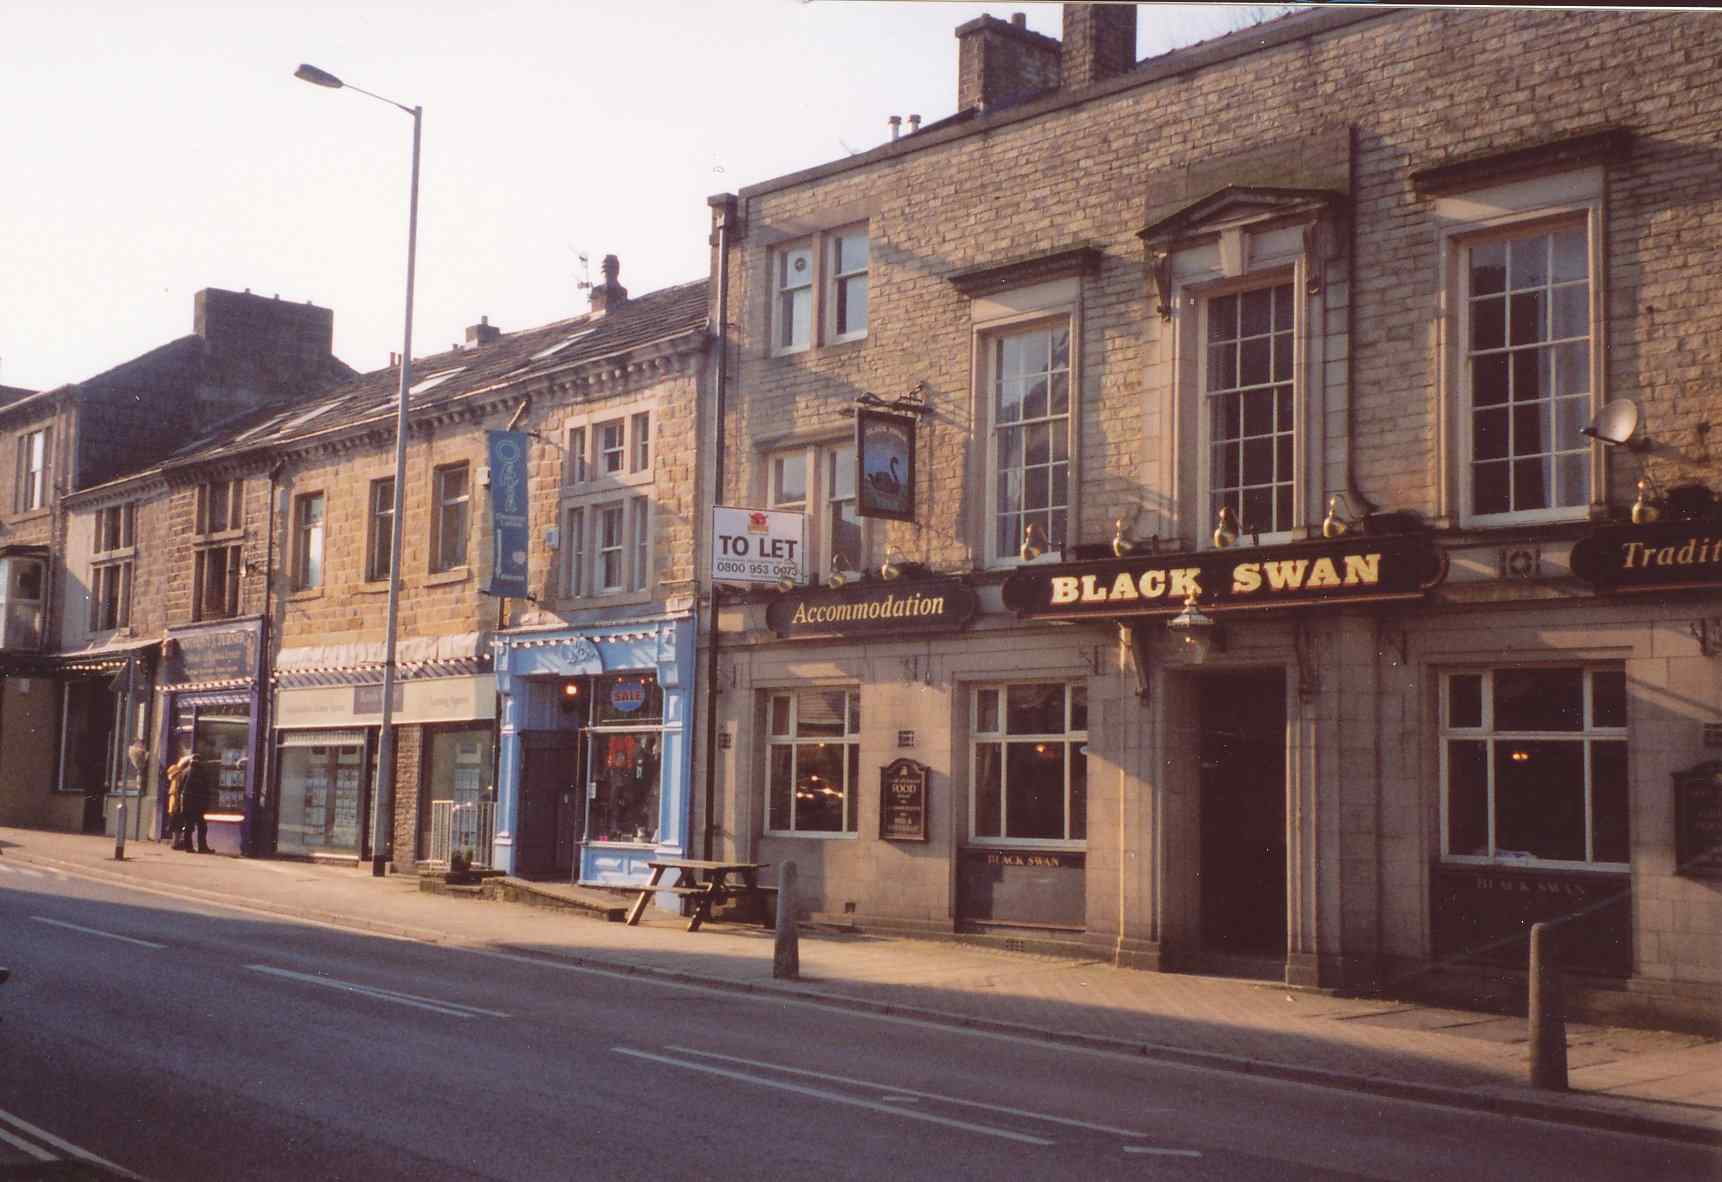 'The Black Swan' pub (when open) 31-33 Burnley Road, Todmorden, looking south west